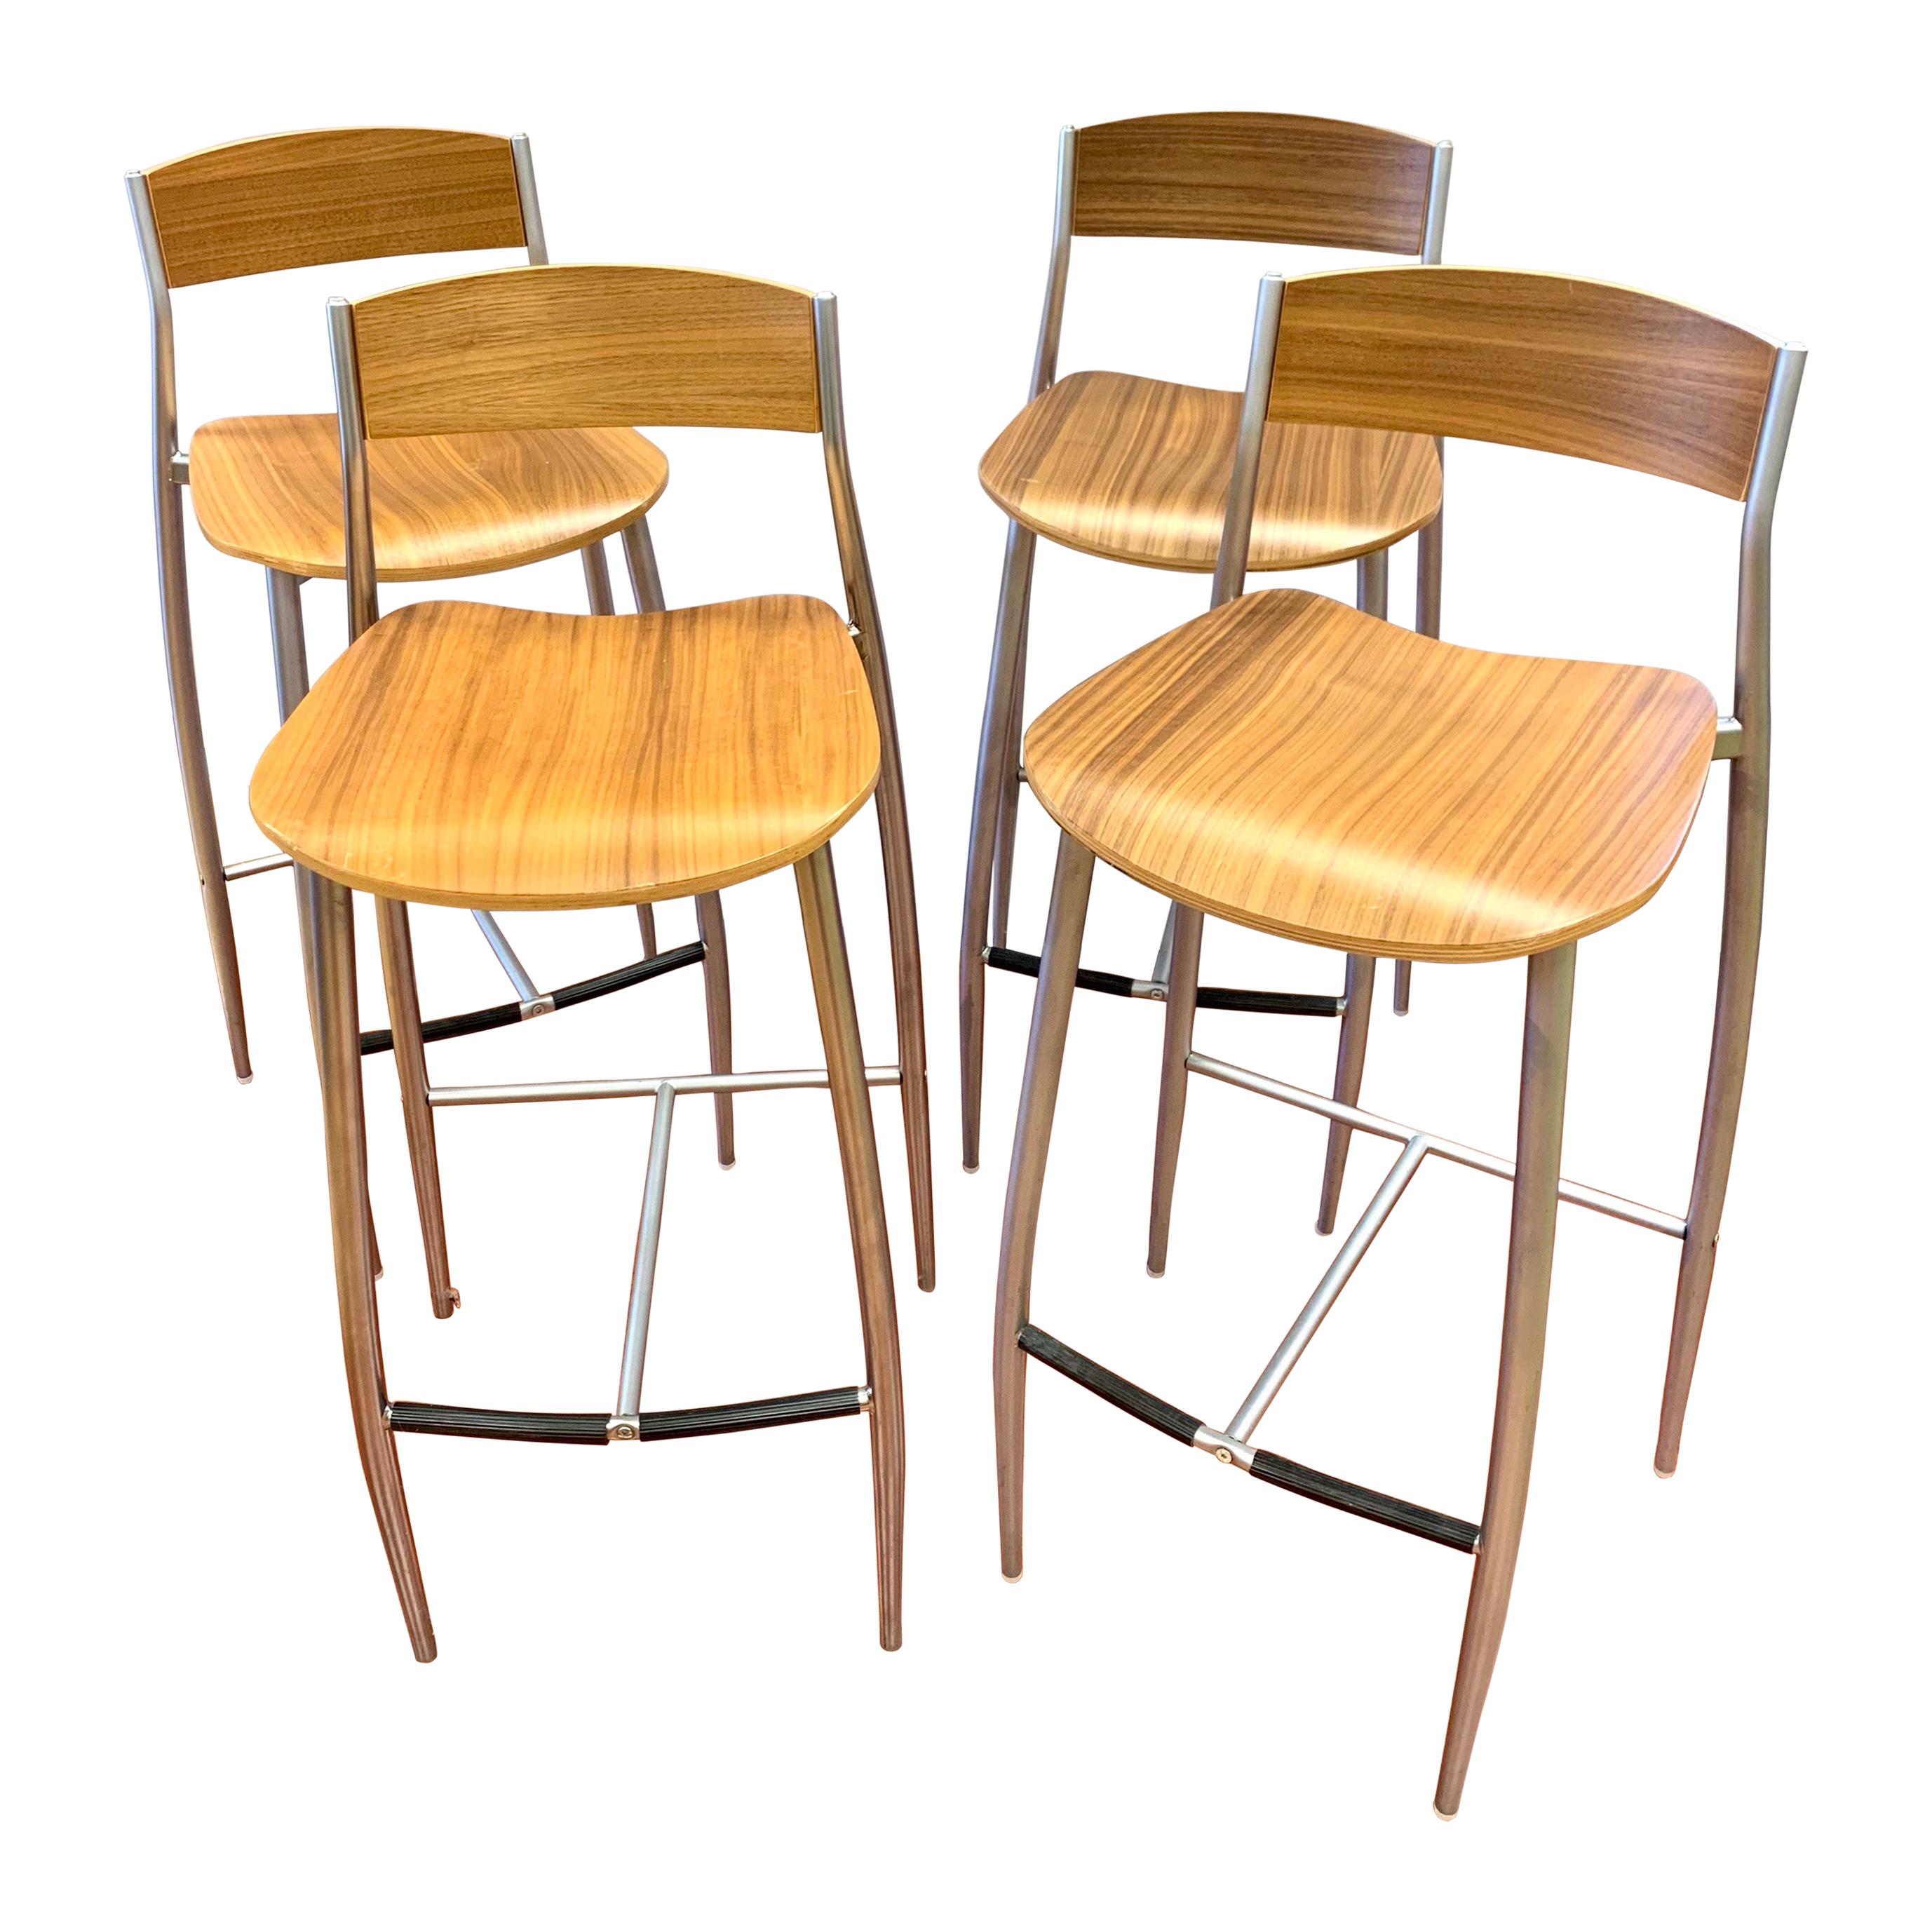 Made in Italy by Altek Set of 4 Steel and Maple Bar Stools Design within Reach